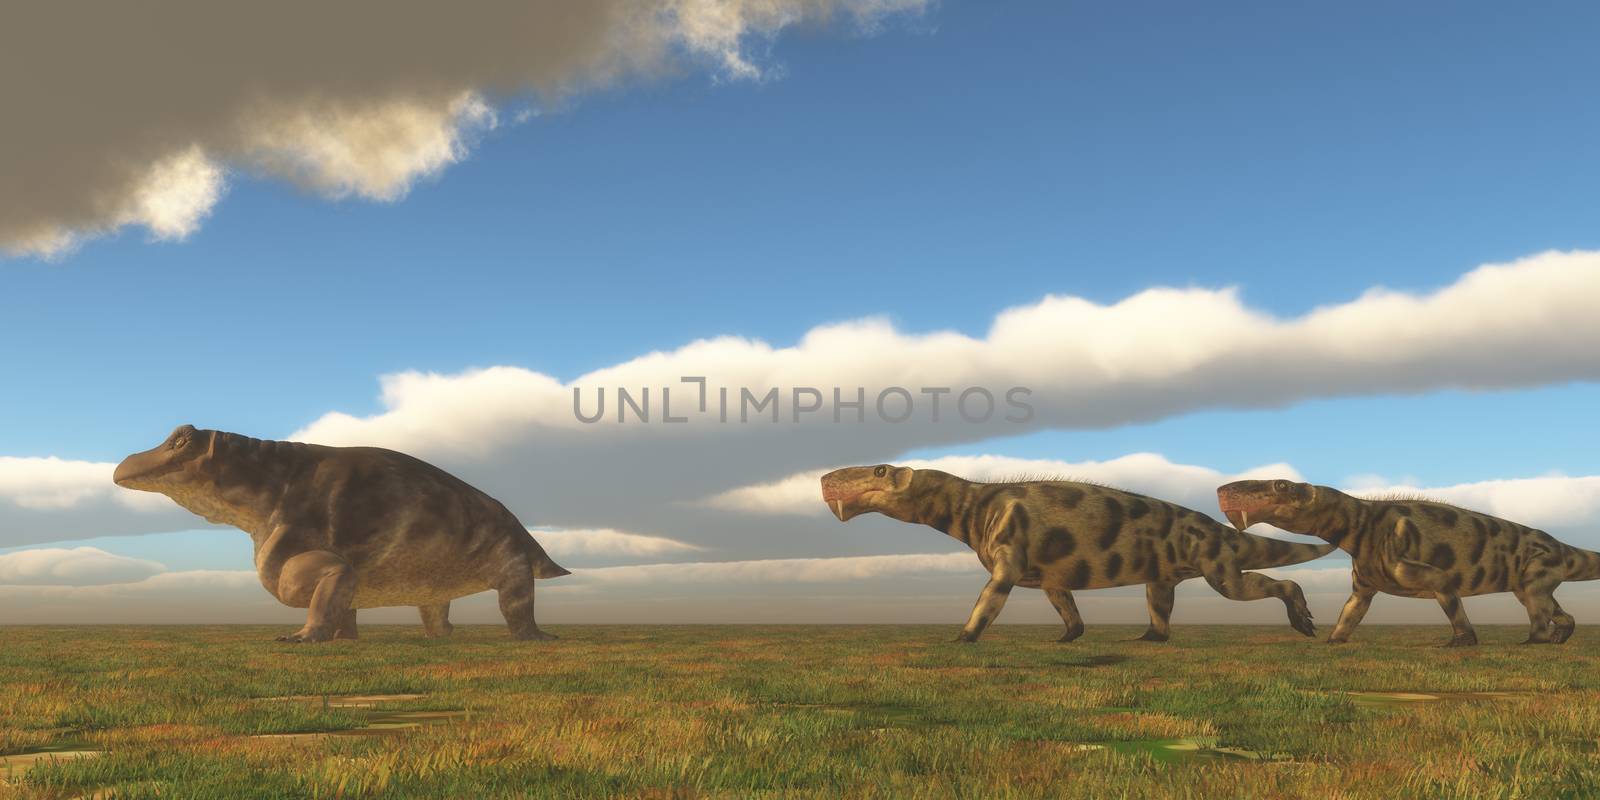 Two Inostrancevia dinosaurs go after a Keratocephalus on a grassy plain in the Permian Period.